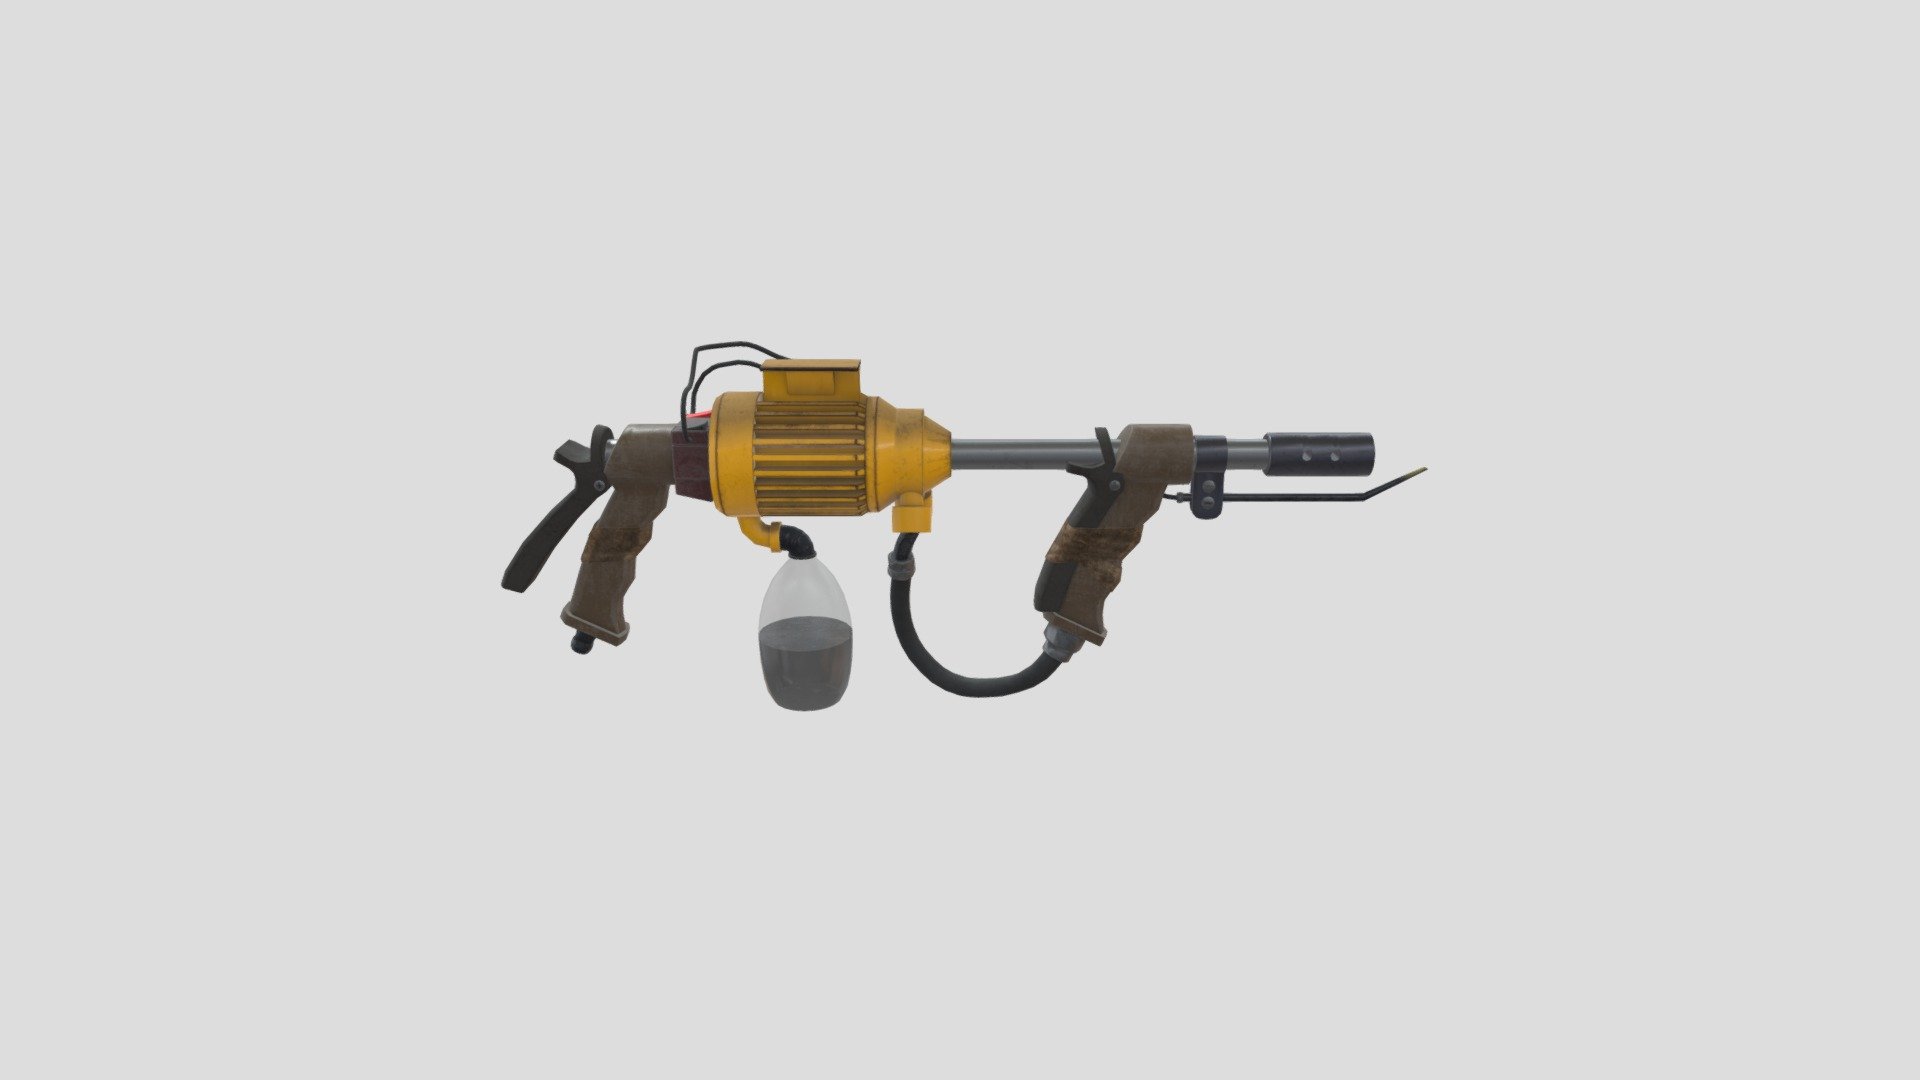 Fire_Spray_gun modeled in maya and textured in substance painter.
game use 3d model